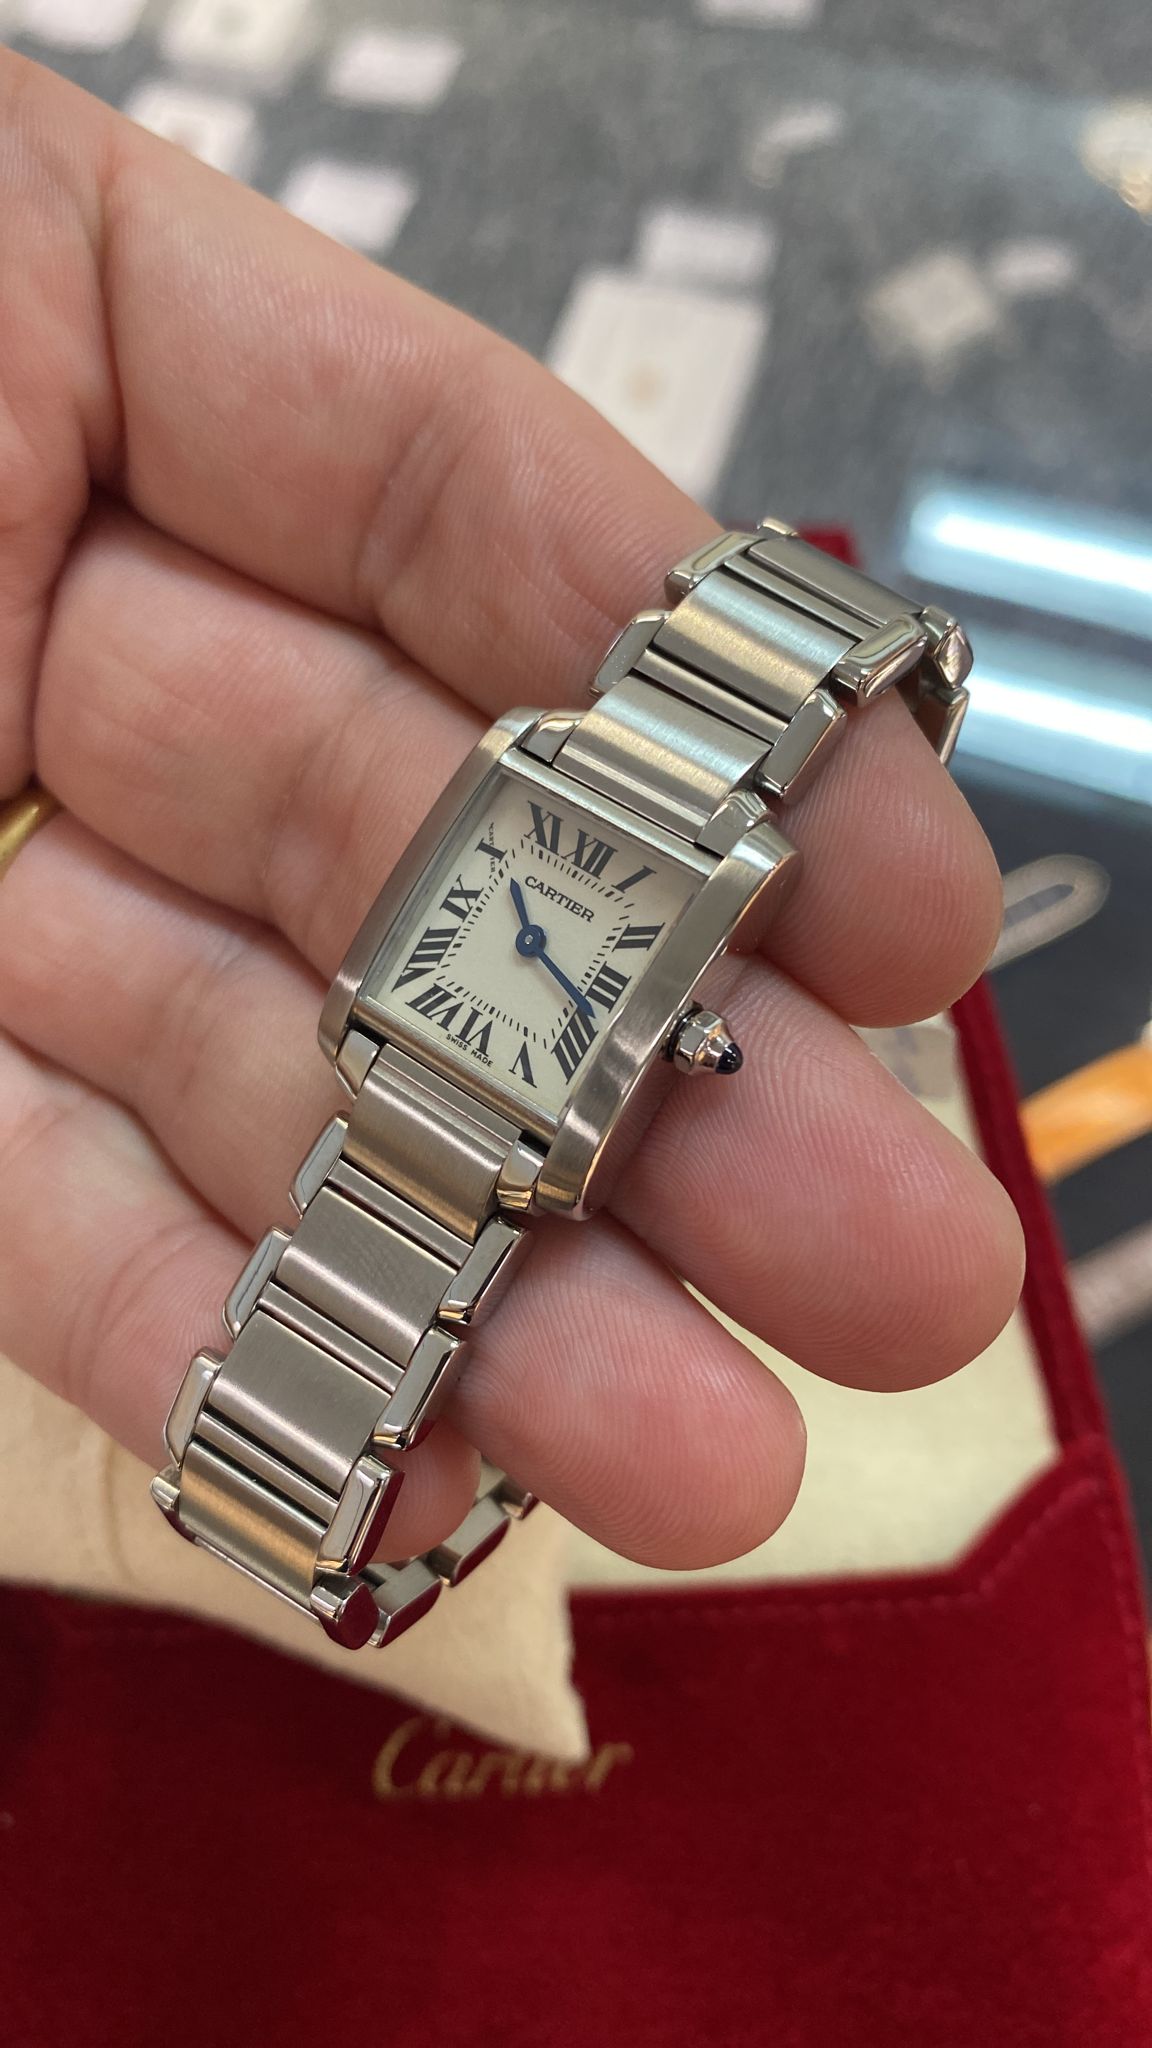 A CARTIER LADIES TANK FRANCAISE STAINLESS STEEL WATCH - Image 7 of 7